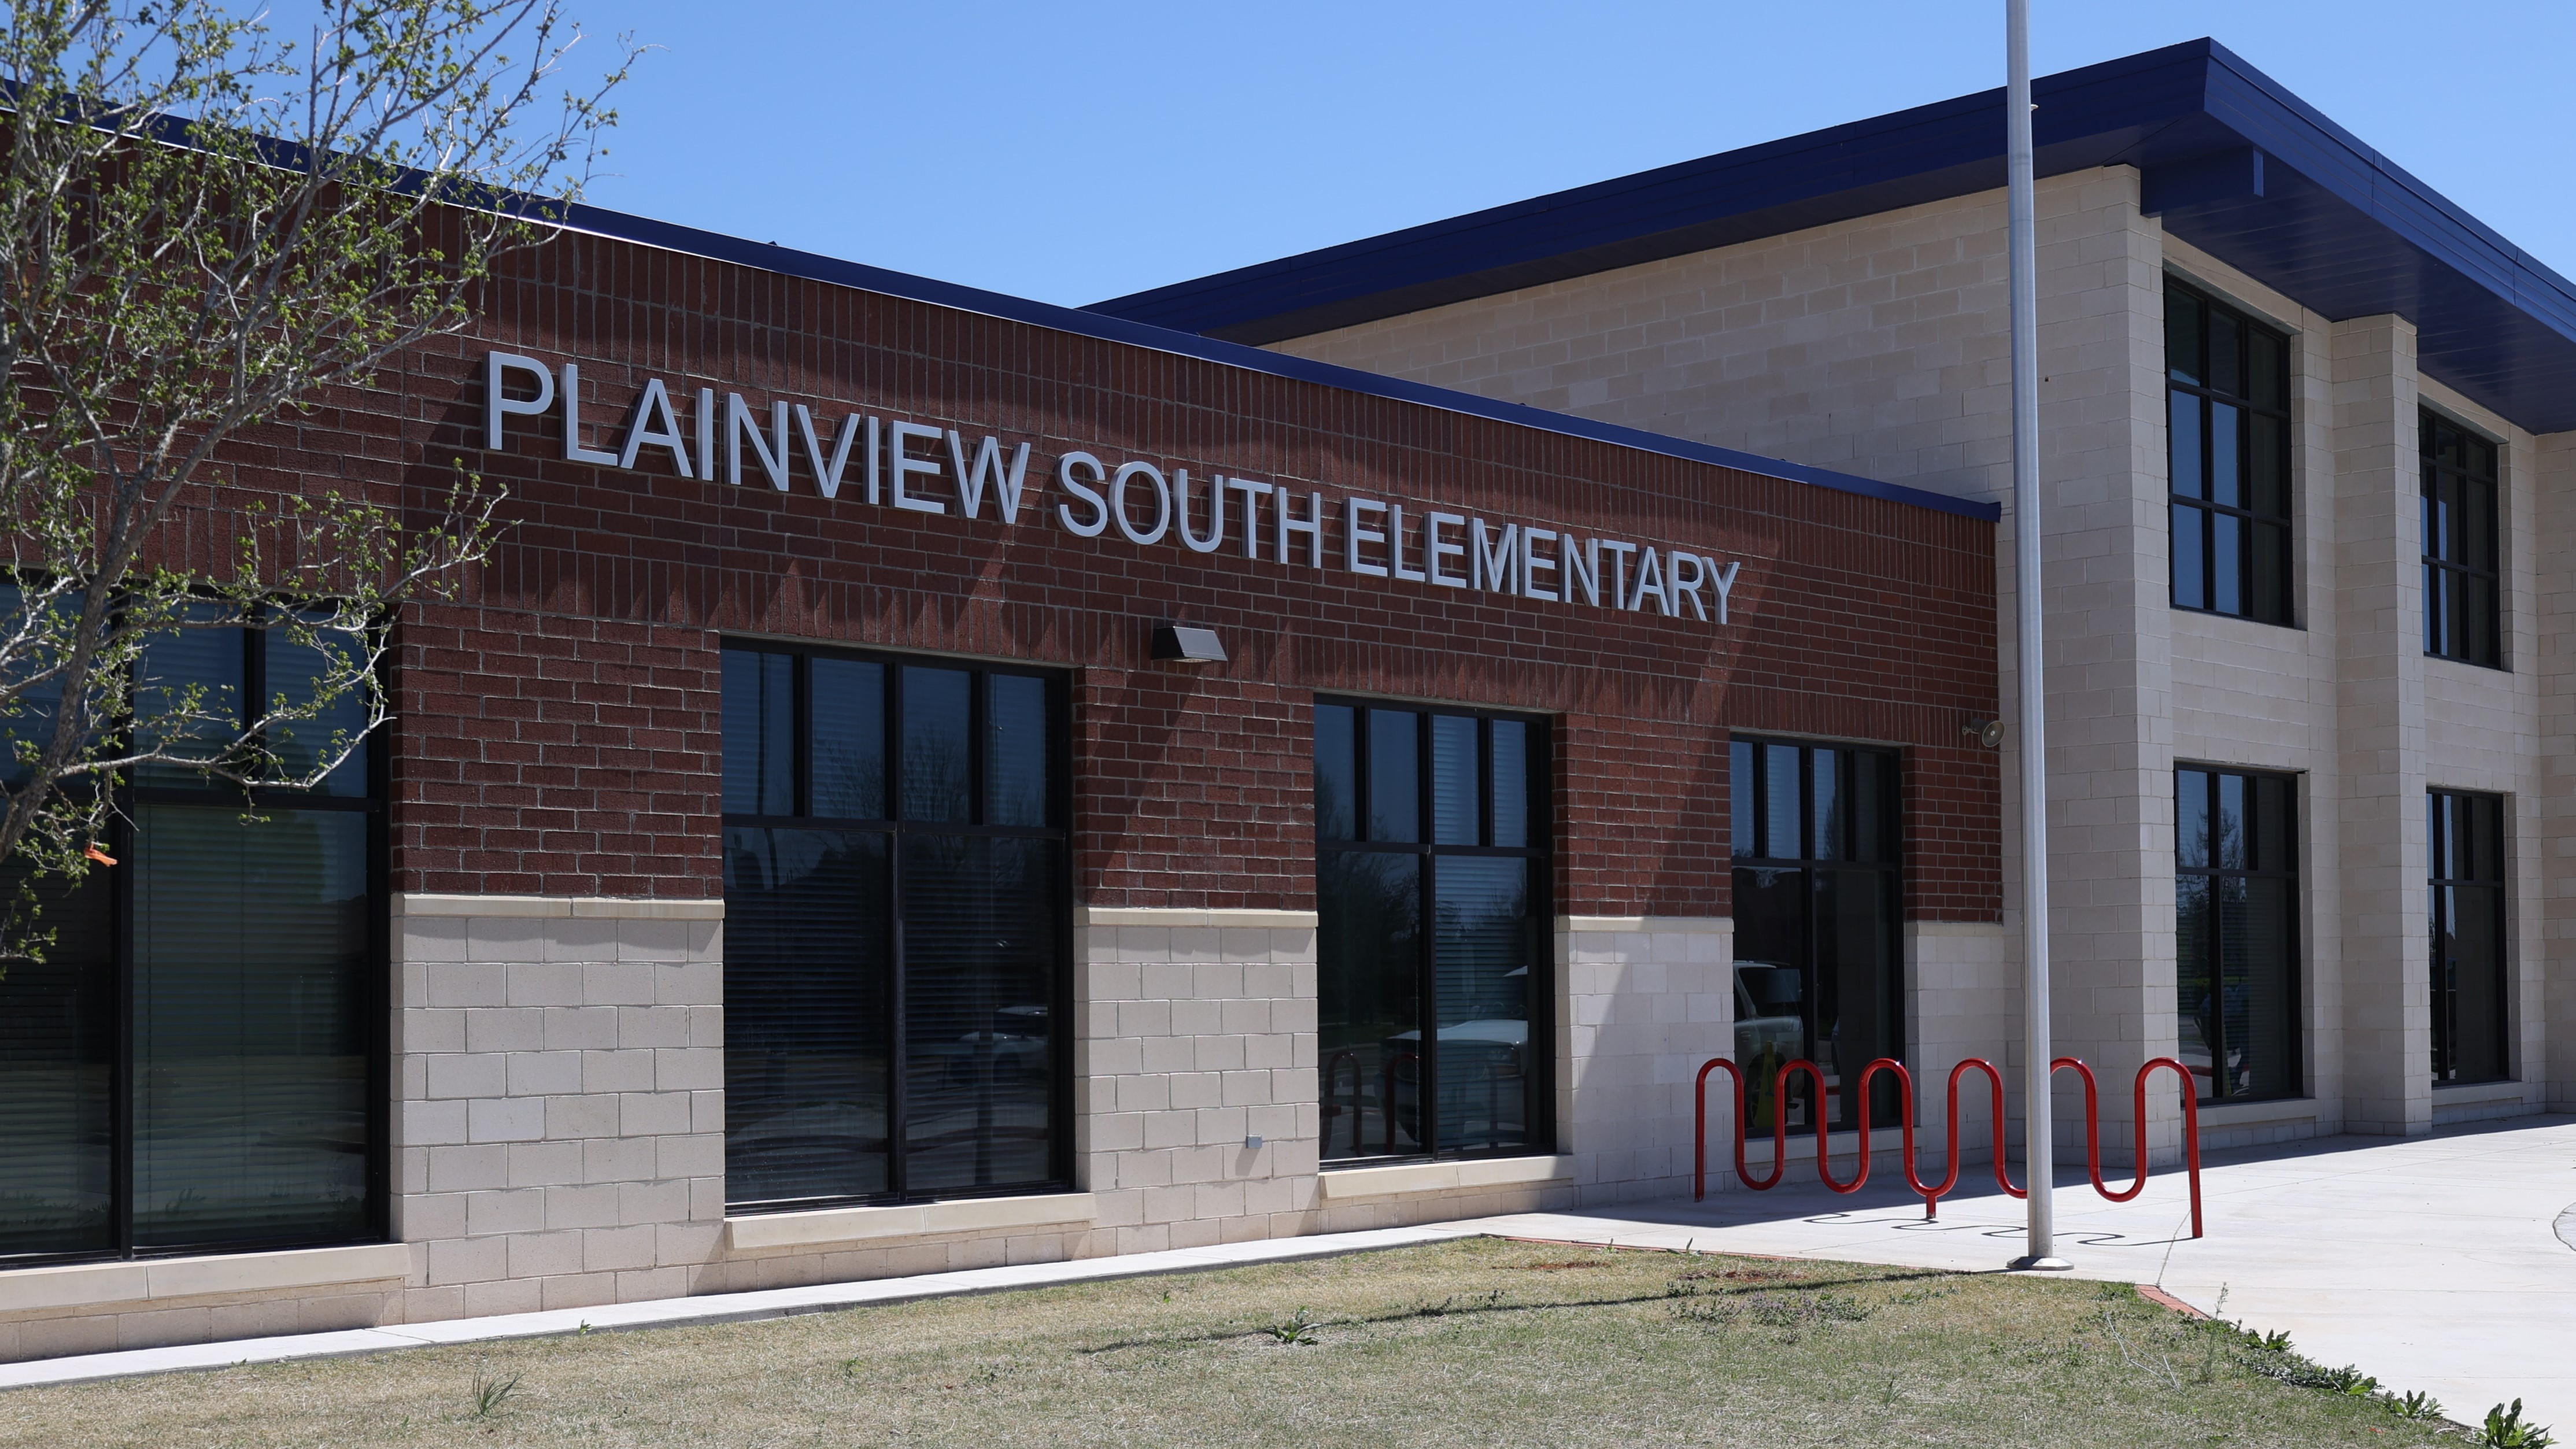 Plainview South Elementary School